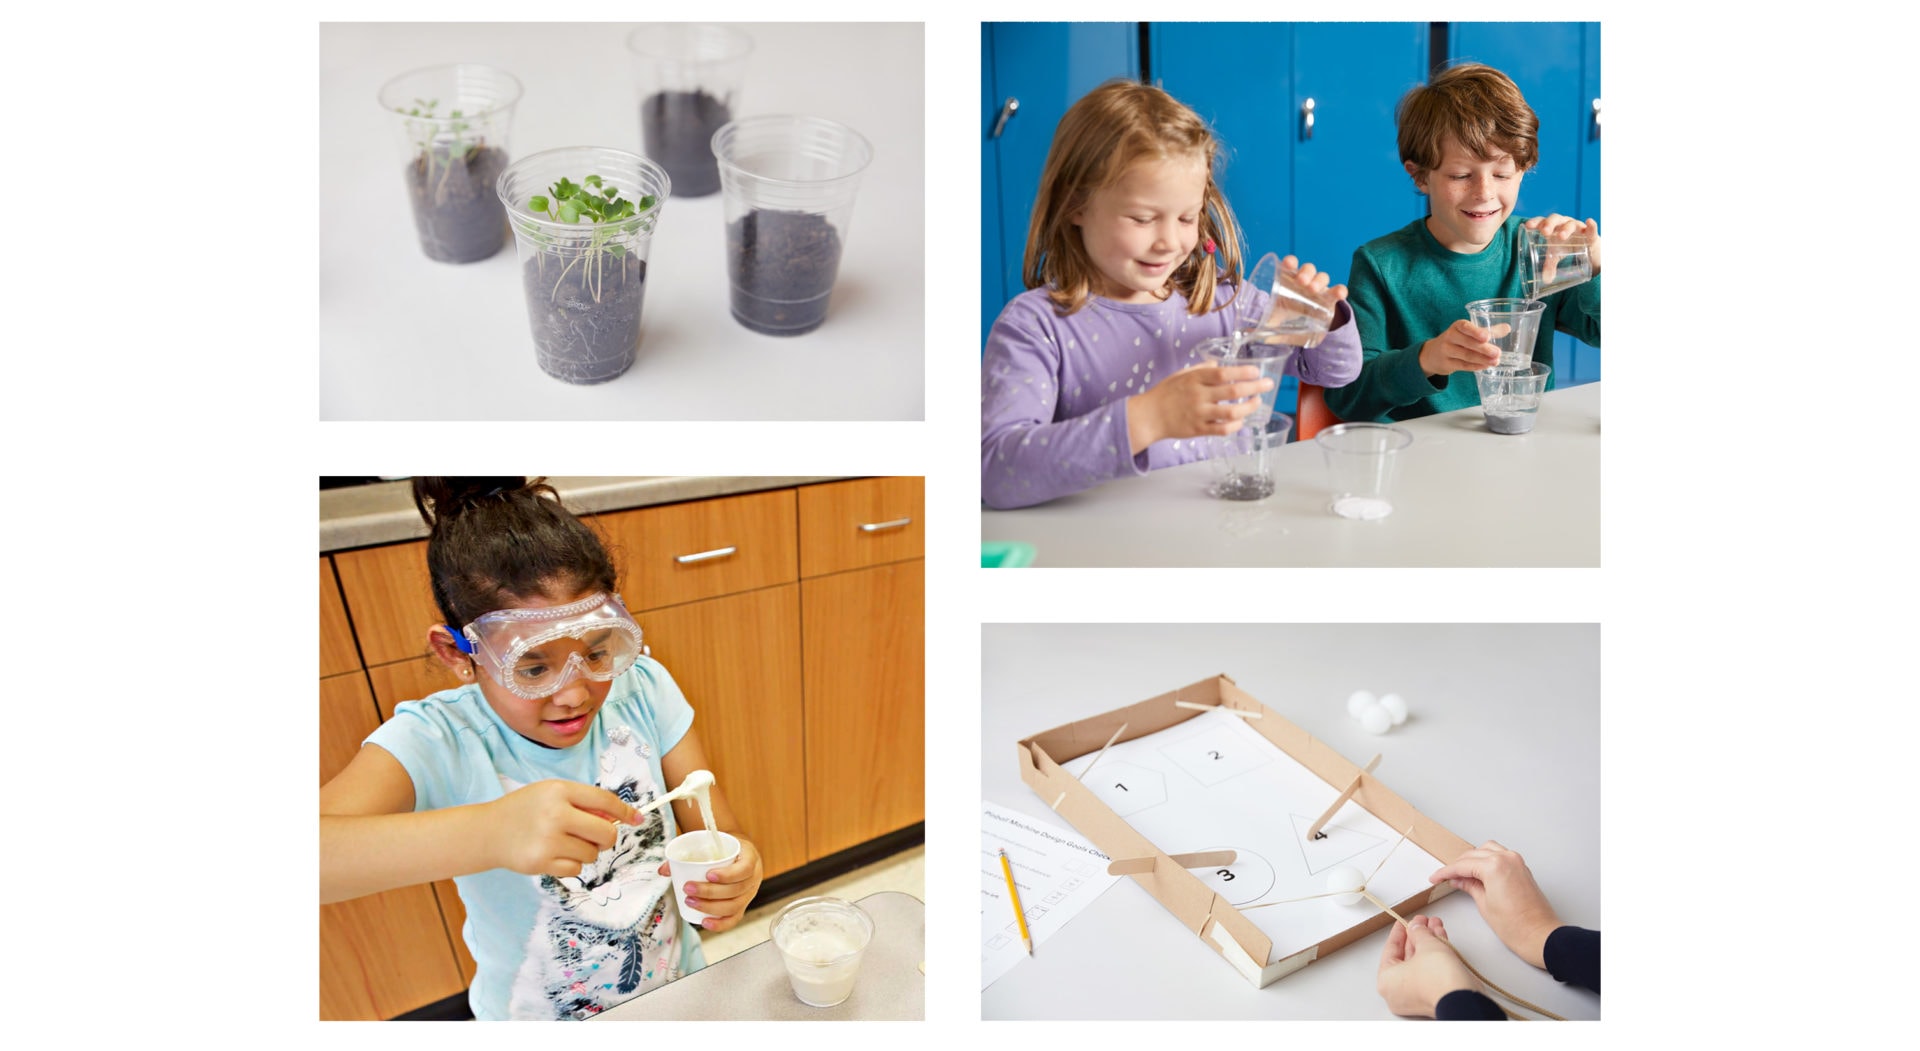 Four images of children engaged in science experiments: growing plants, using liquids, a girl in safety goggles mixing substances, and playing with a physics kit.